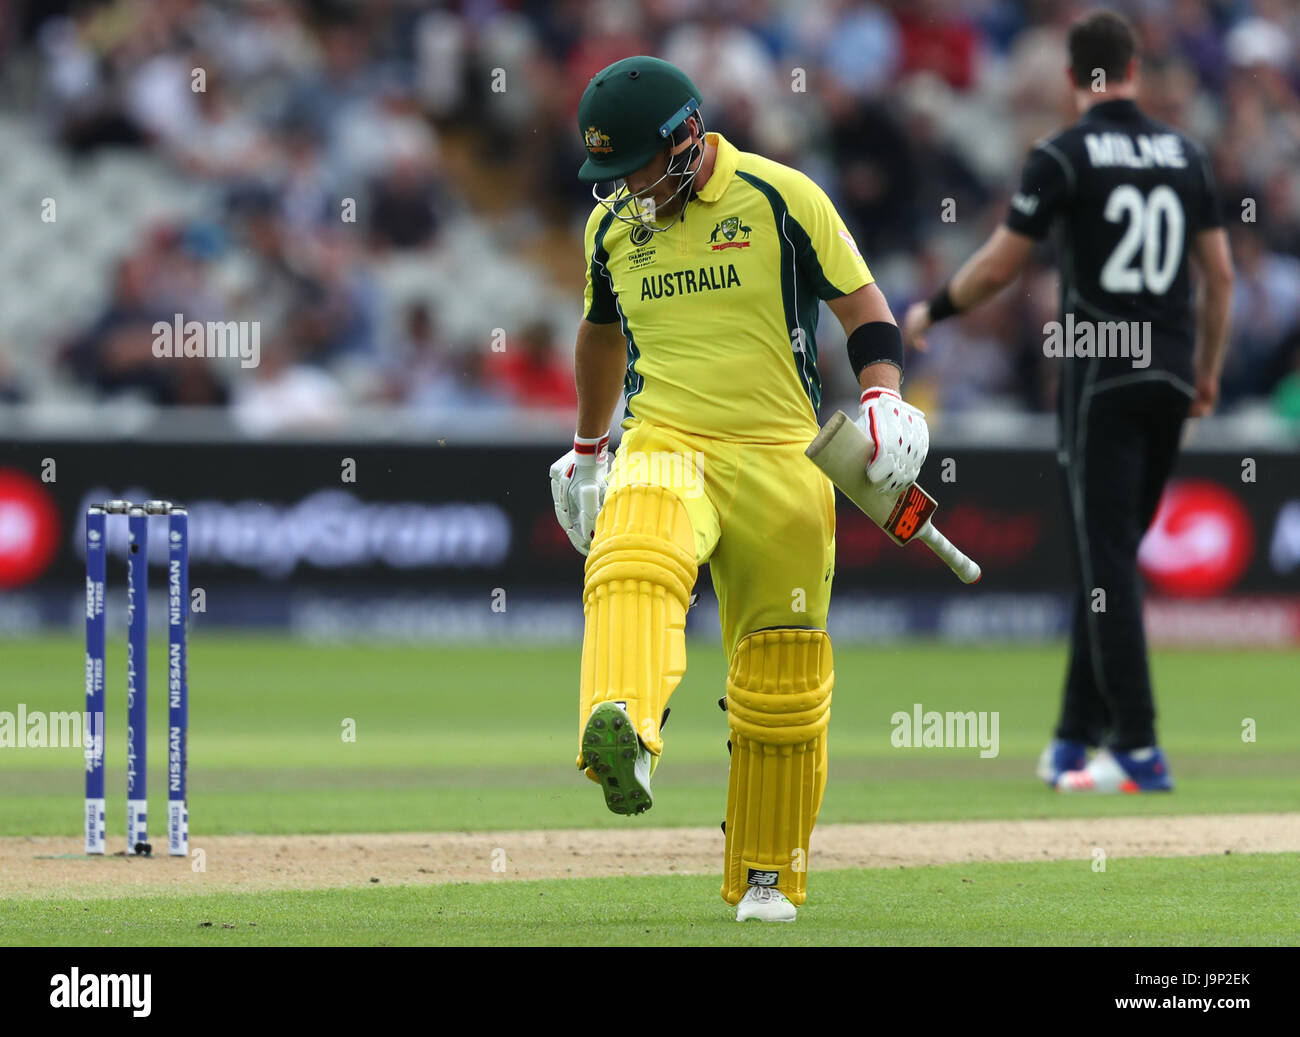 Australia's Aaron Finch kicks the ground in frustration after being dismissed by New Zealand's Trent Boult during the ICC Champions Trophy, Group A match at Edgbaston, Birmingham. Stock Photo